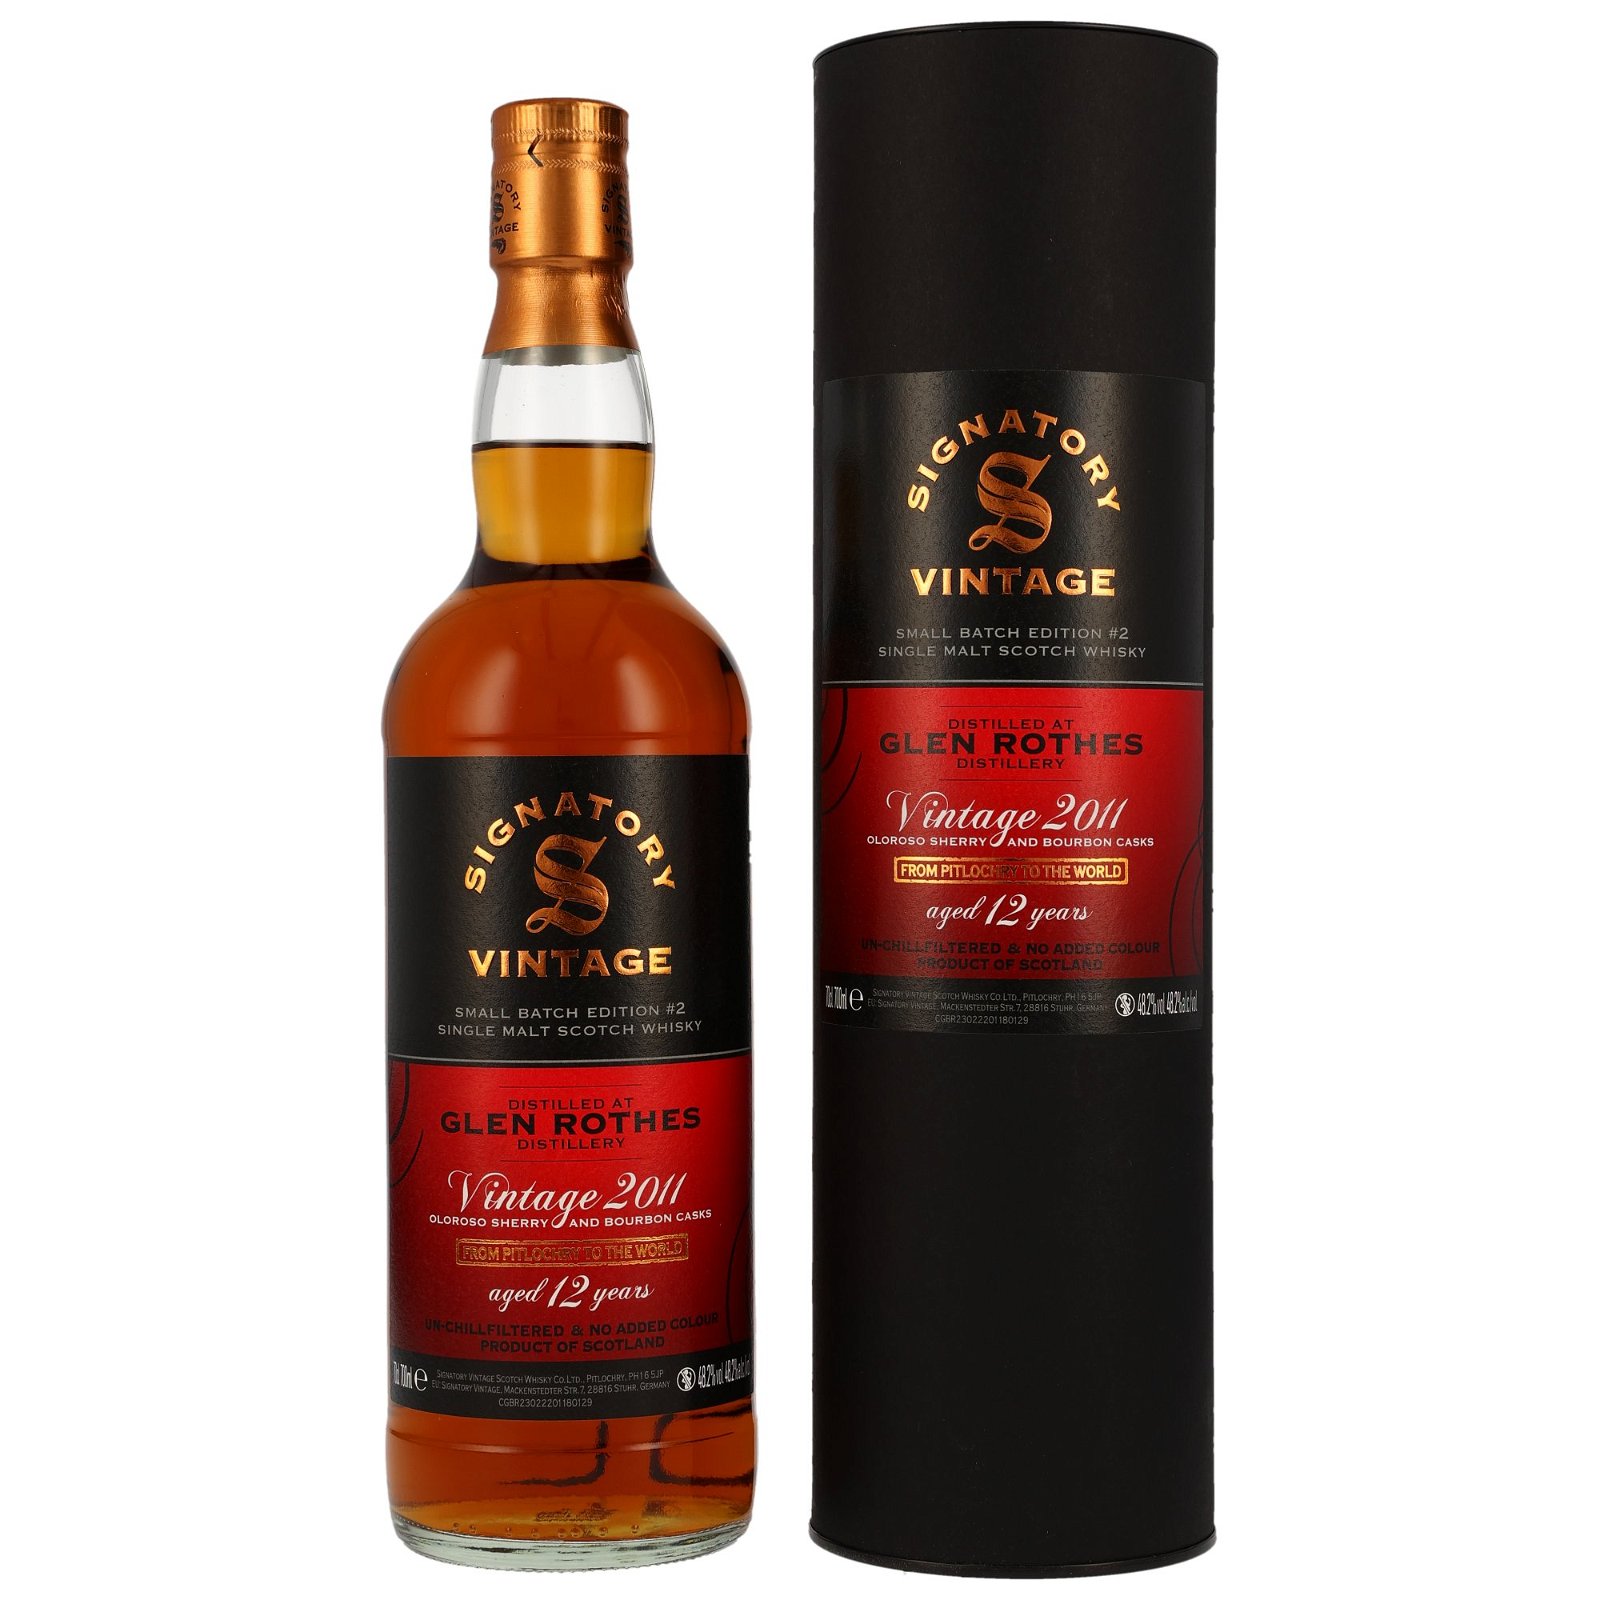 Glen Rothes Vintage 2011 - 12 Jahre Oloroso Sherry and Bourbon Casks Small Batch Edition #2 (Signatory)